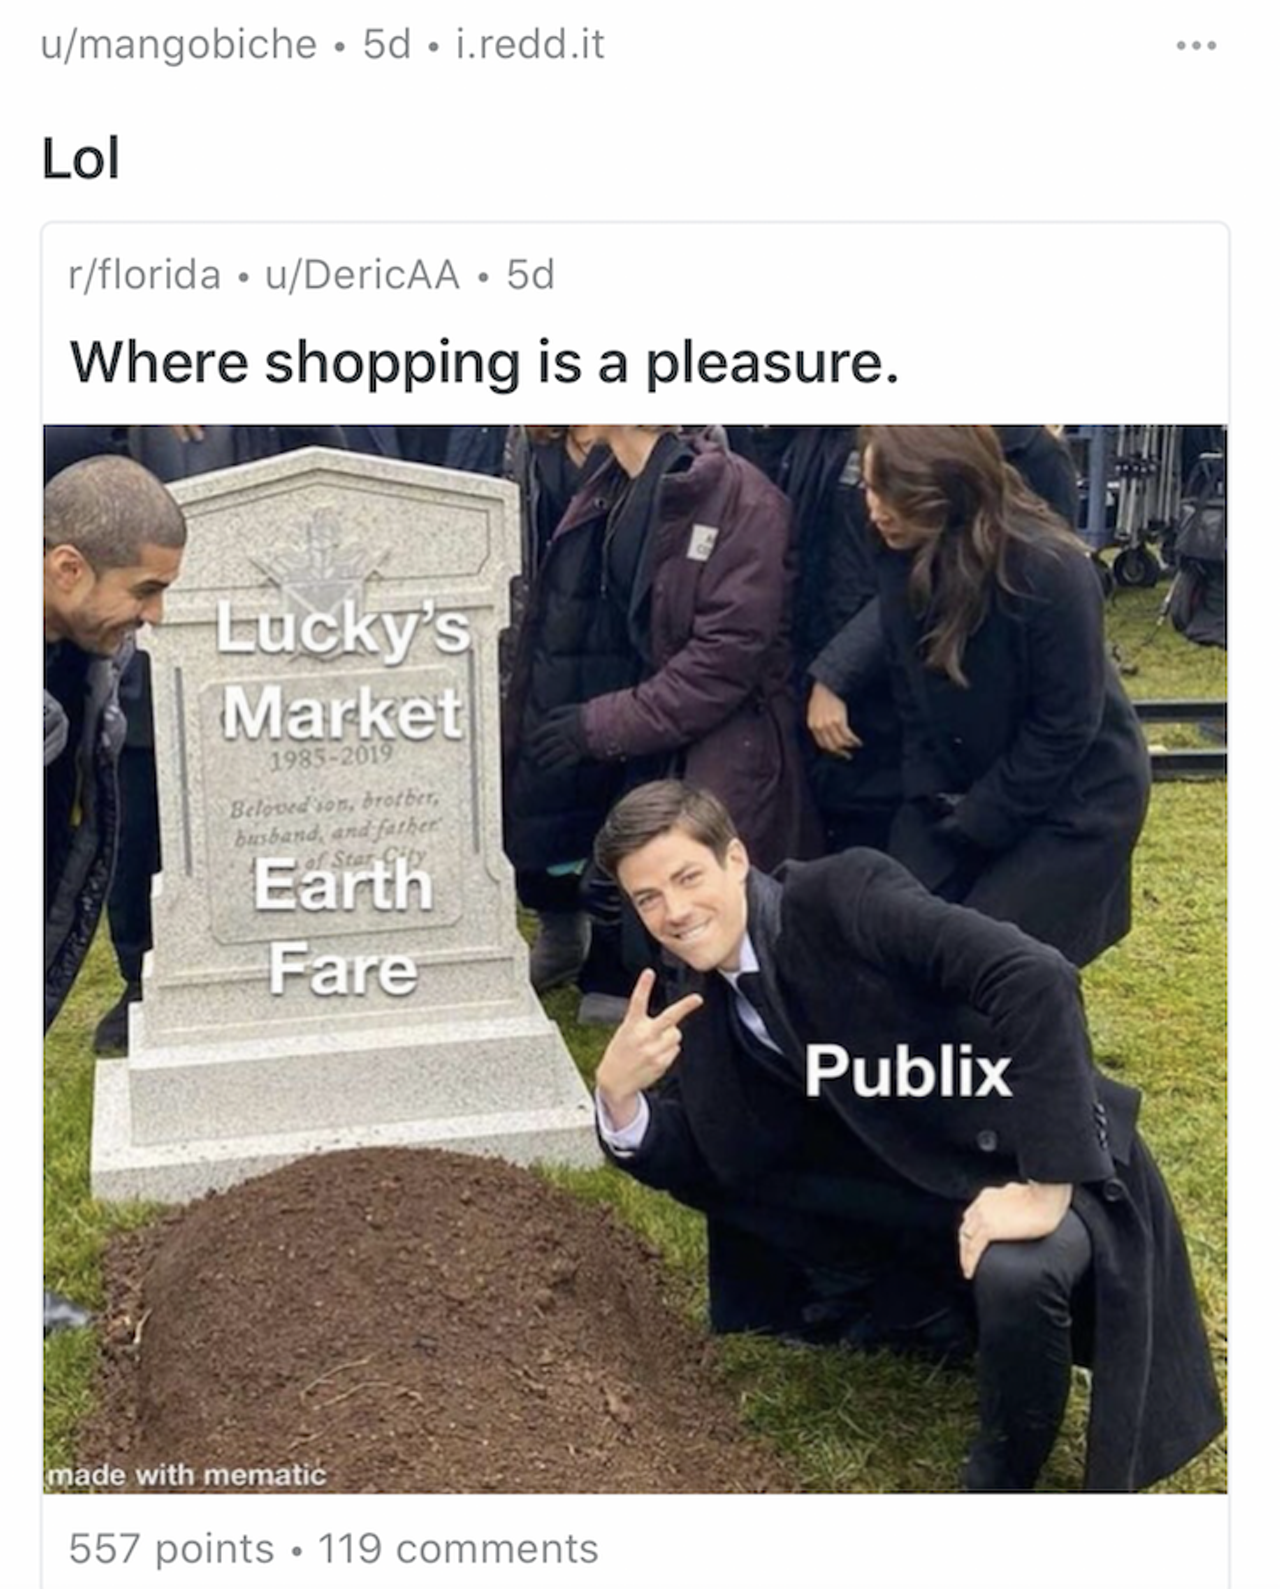 The best way to understand Publix is through the memes of its employees